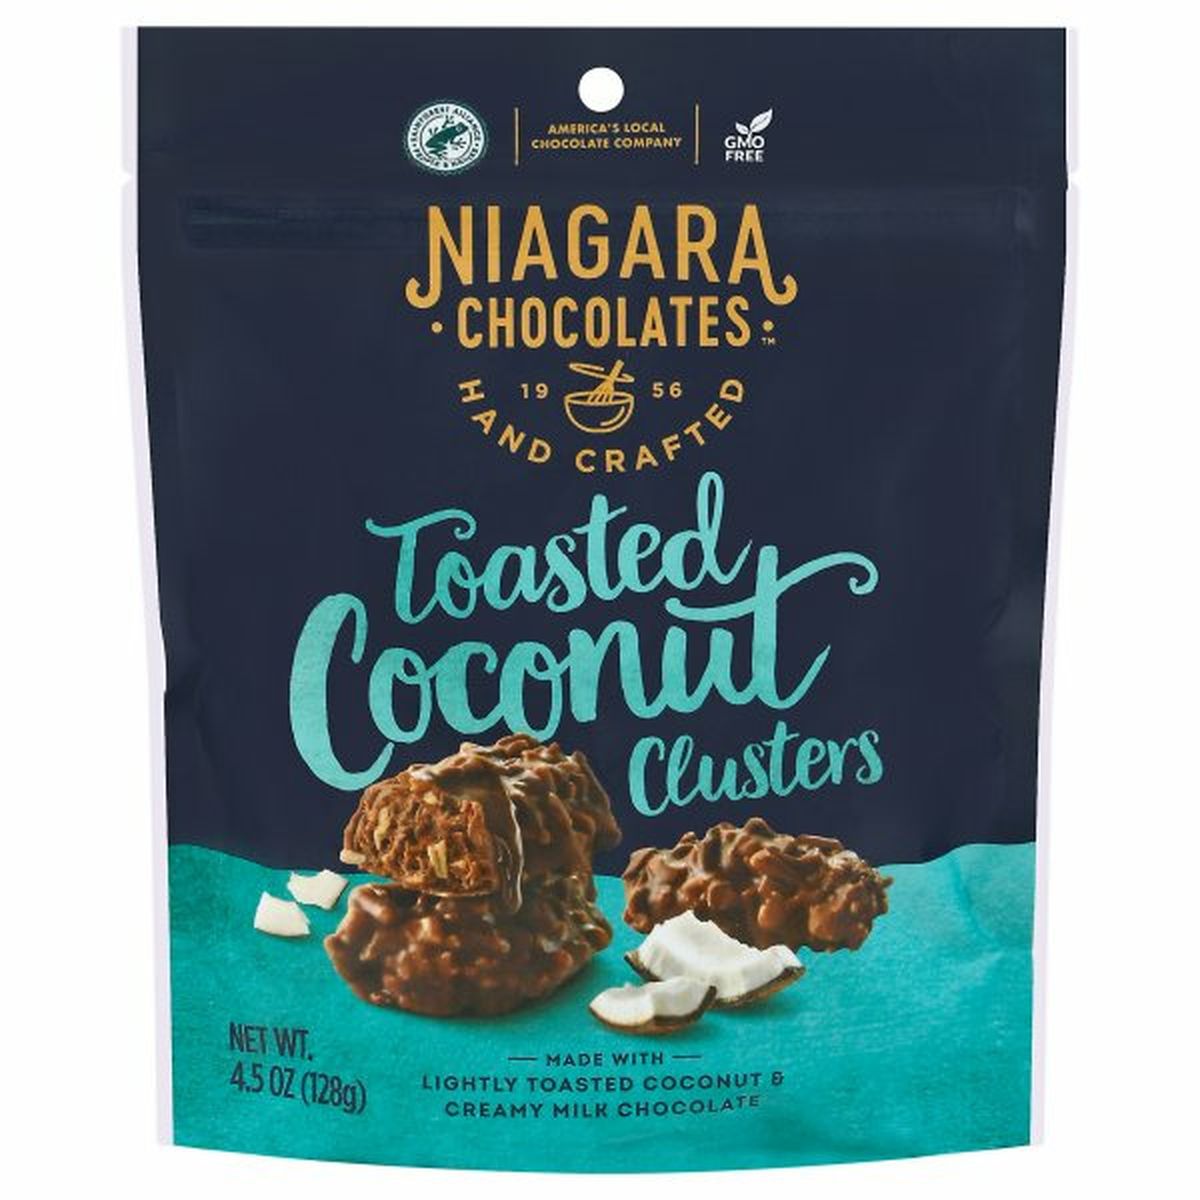 Calories in Niagara Chocolates Coconut Clusters, Toasted